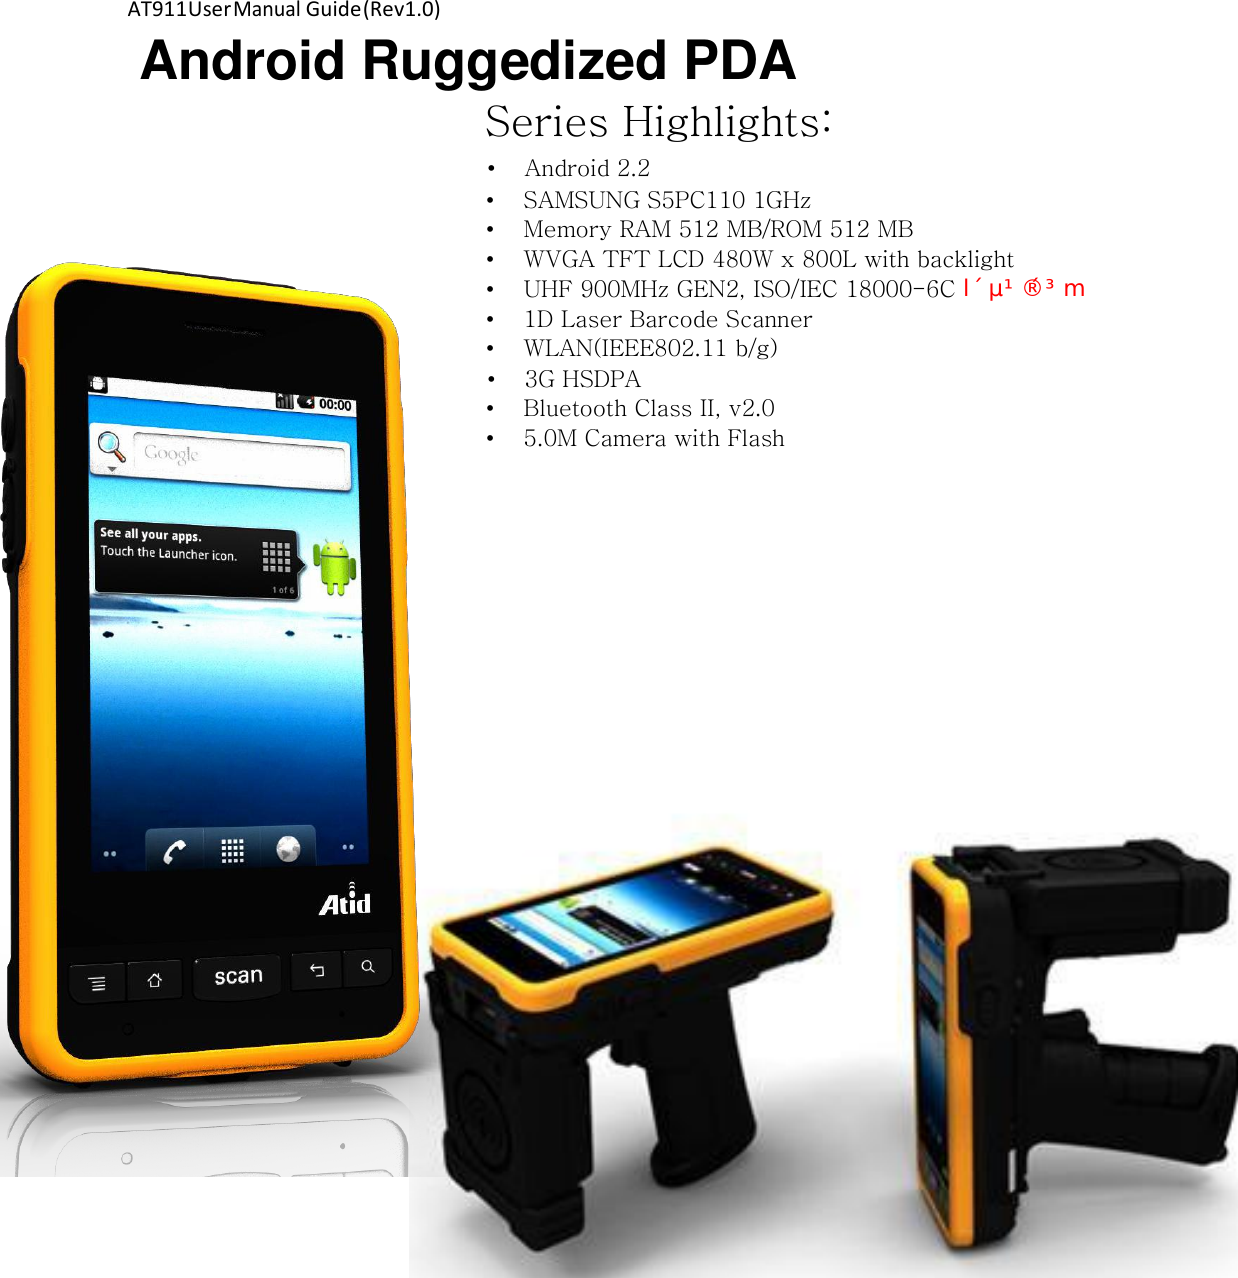 AT911 User Manual Guide (Rev1.0) Android Ruggedized PDA Series Highlights:  • Android 2.2 • SAMSUNG S5PC110 1GHz • Memory RAM 512 MB/ROM 512 MB • WVGA TFT LCD 480W x 800L with backlight • UHF 900MHz GEN2, ISO/IEC 18000-6C Ovw{pvuP• 1D Laser Barcode Scanner • WLAN(IEEE802.11 b/g) • 3G HSDPA • Bluetooth Class II, v2.0 • 5.0M Camera with Flash 